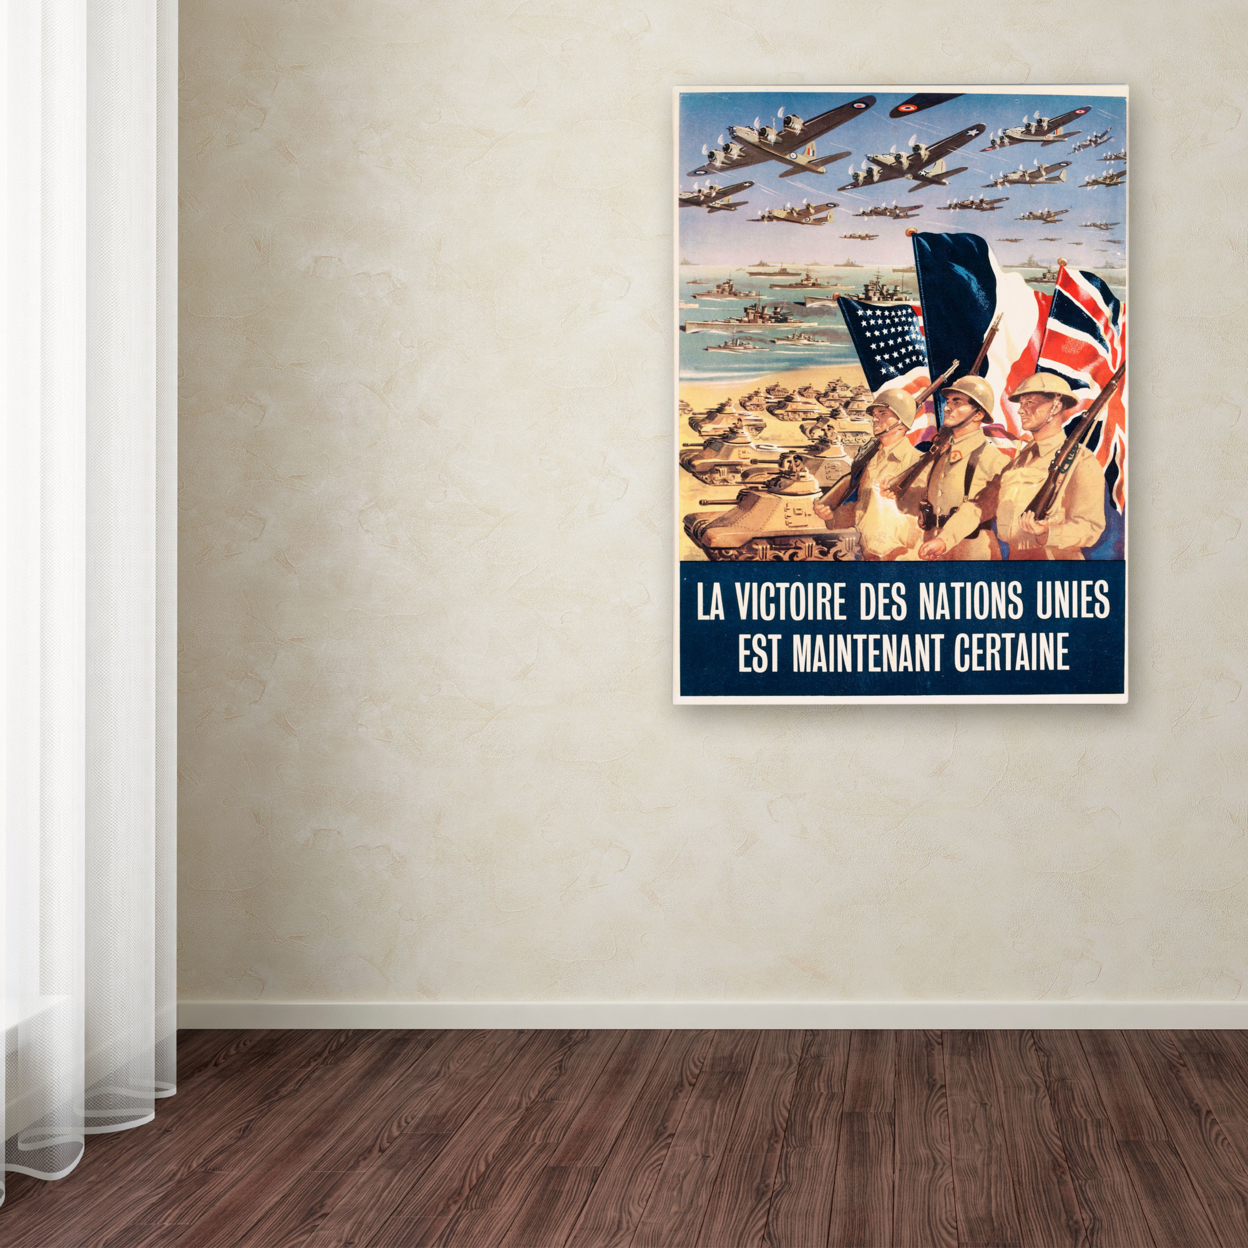 French Propaganda Poster From World War II' Canvas Wall Art 35 X 47 Inches